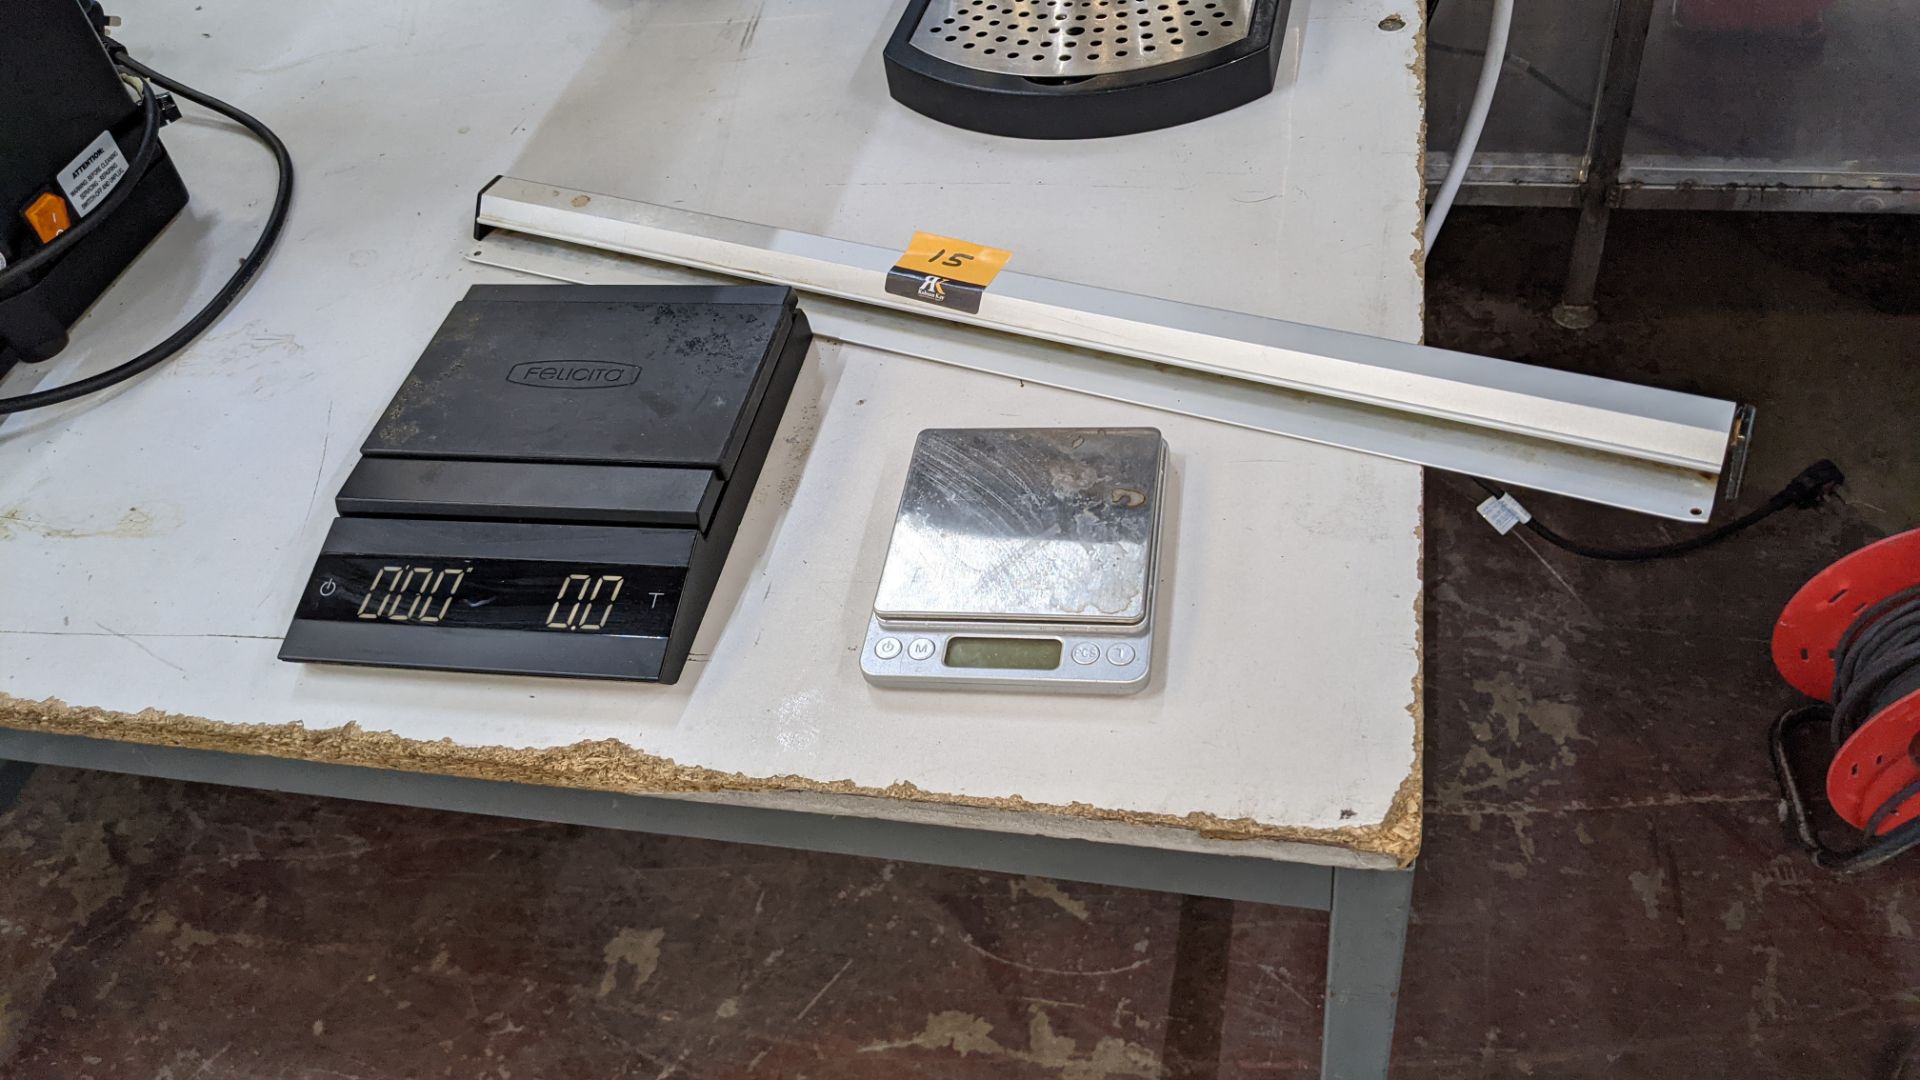 Mixed lot comprising Felicita Parallel model weighing scales, mini weighing scales & wall-mountable - Image 7 of 7